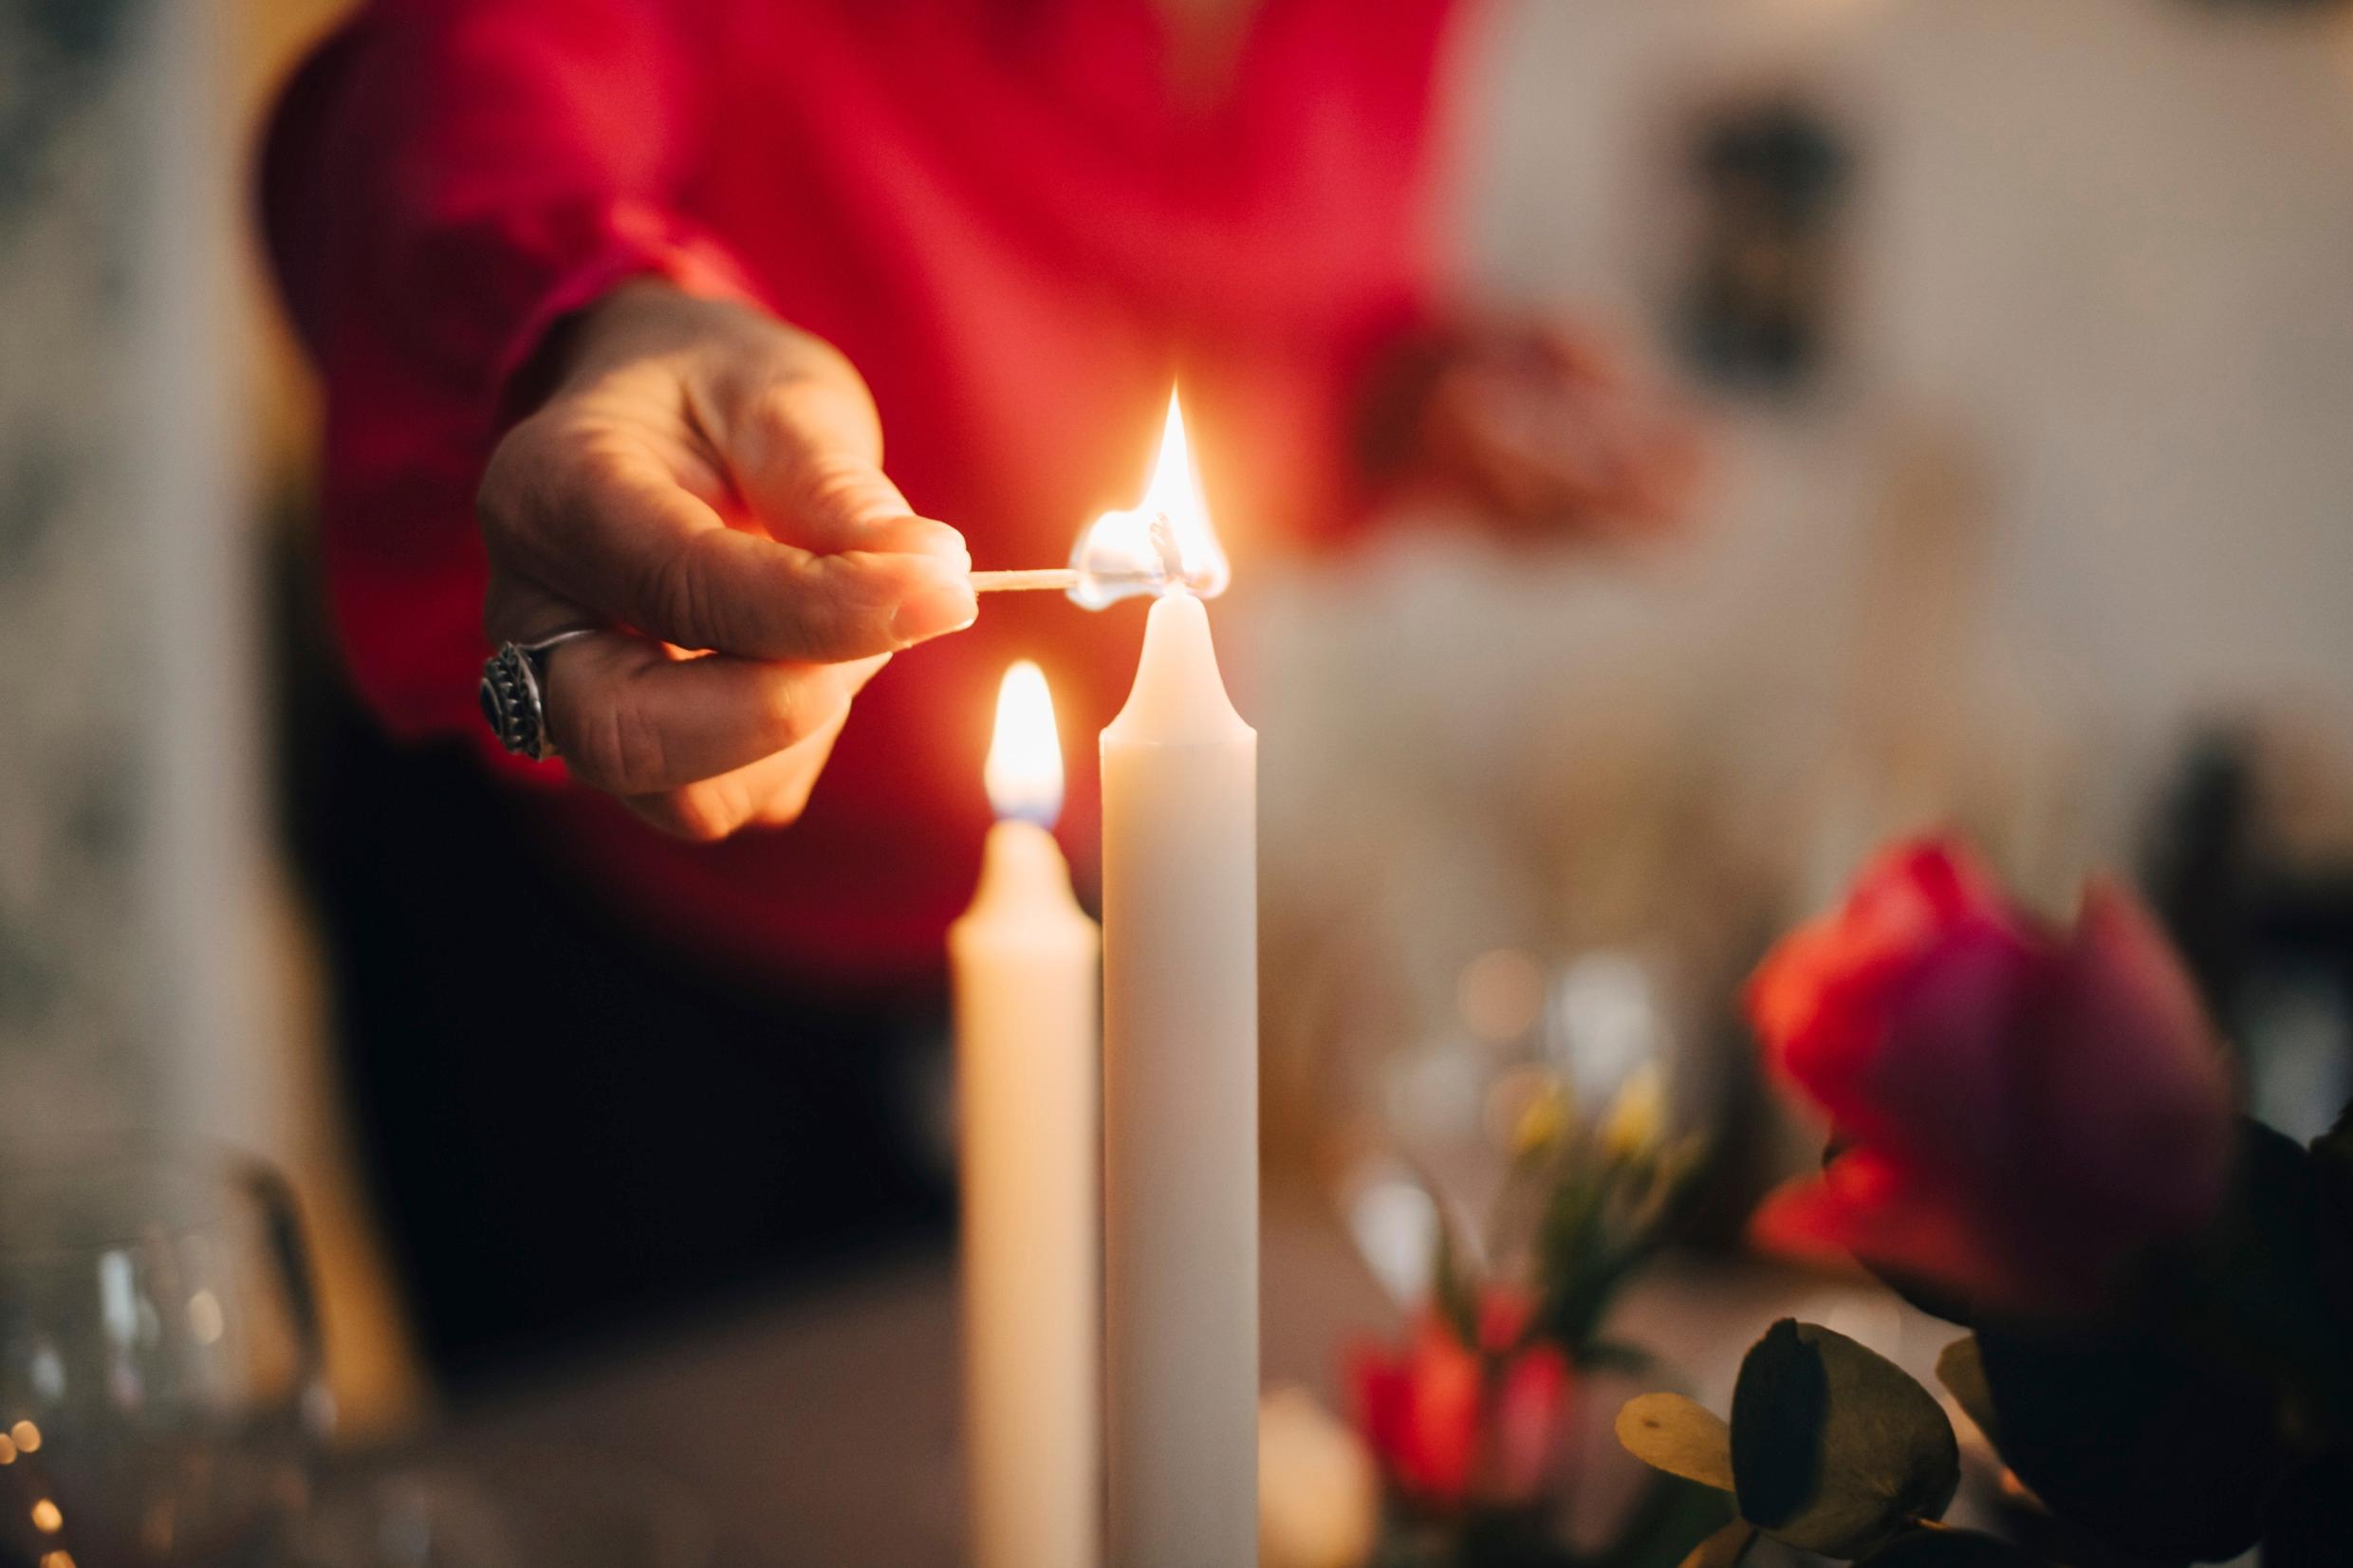 A candle is lit by a person in a red jumper.